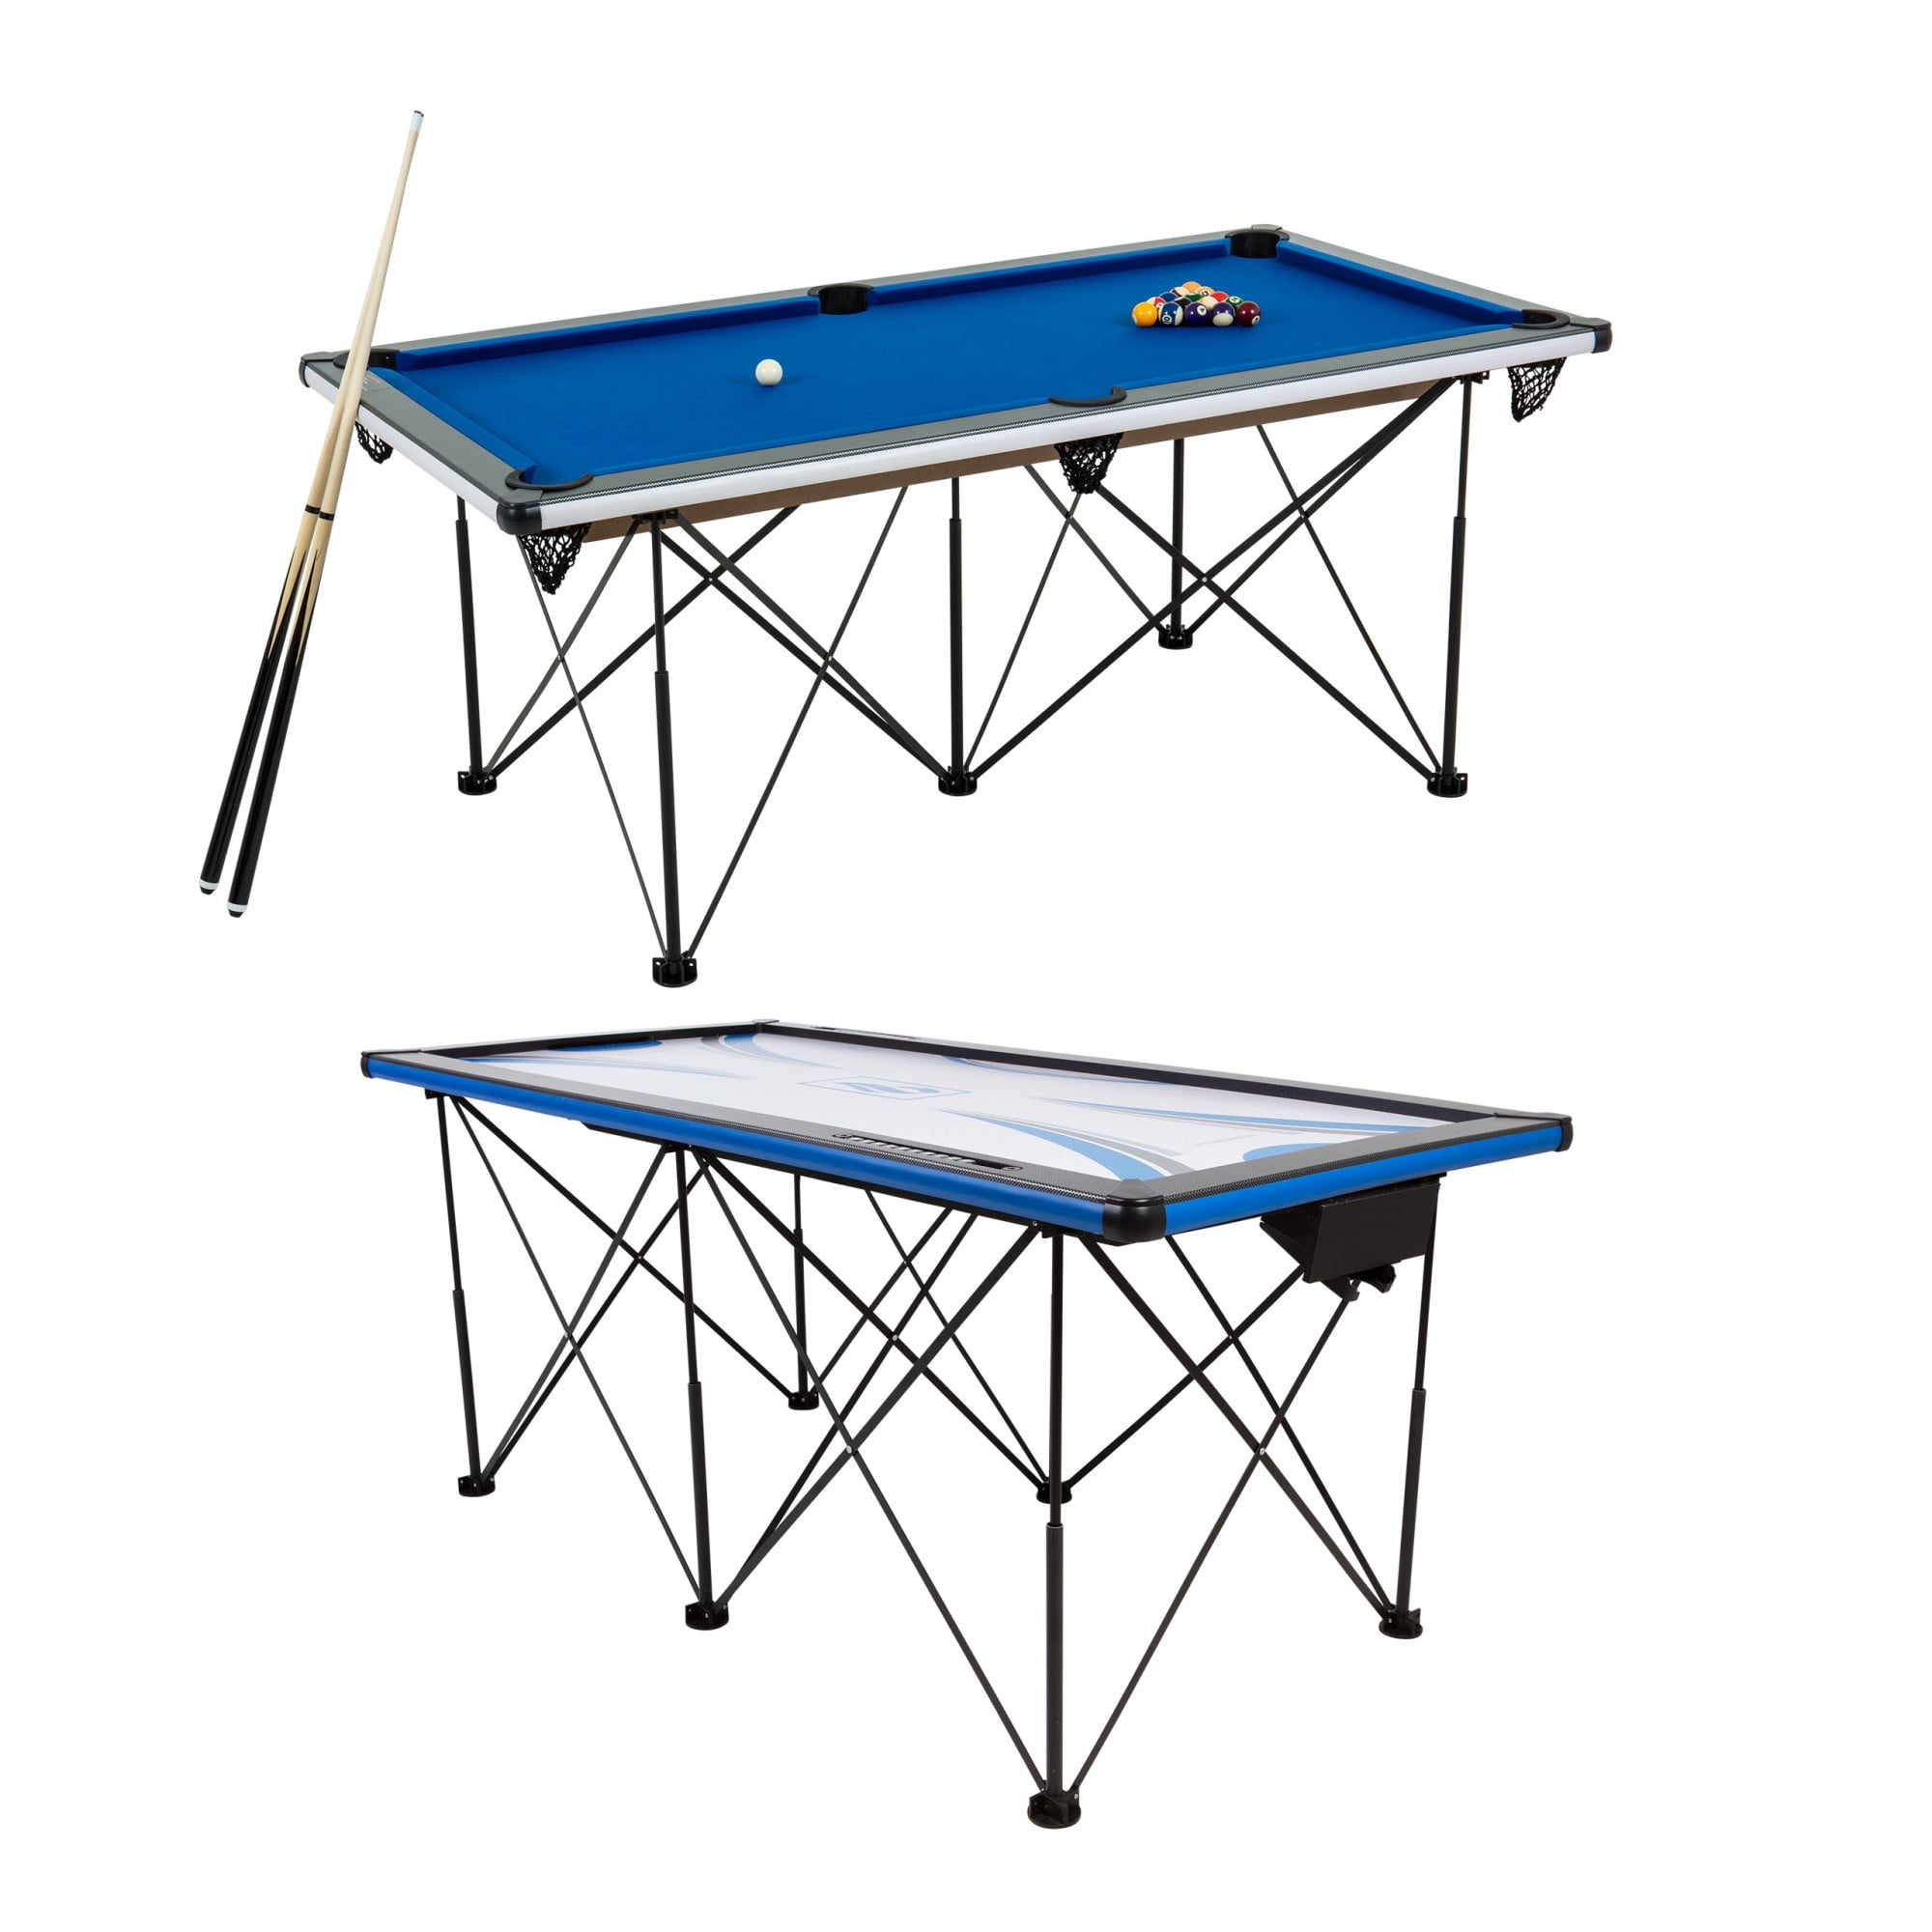 Triumph Sports 6’ Portable Pop Up Folding Air Hockey Table with Folding Legs, Instant Assembly and Accessories Included